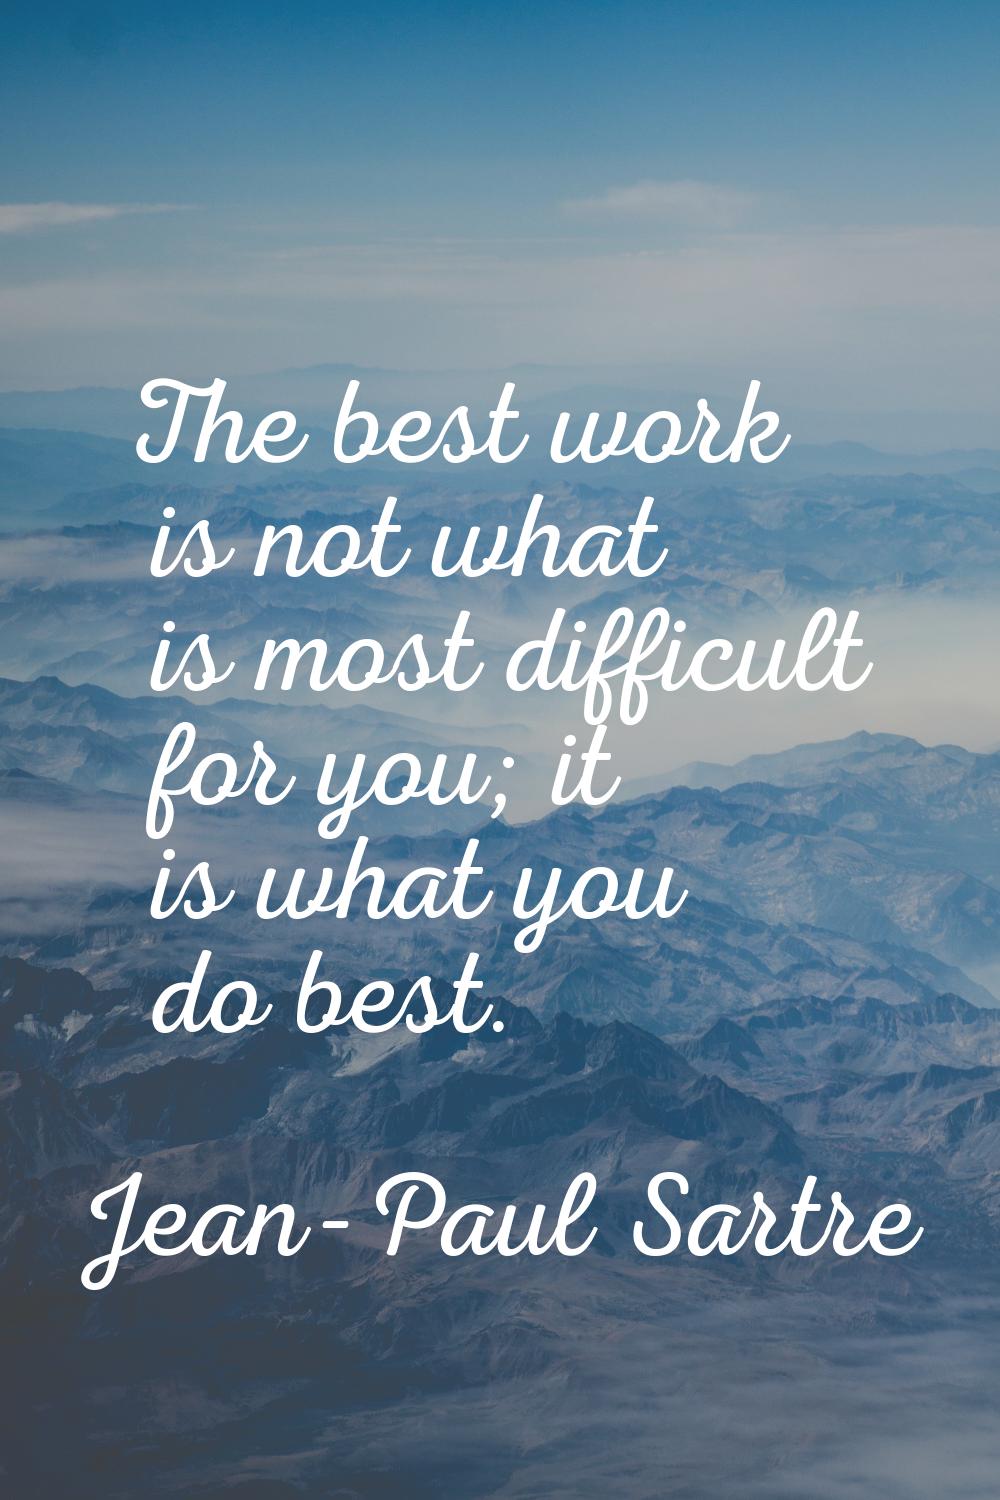 The best work is not what is most difficult for you; it is what you do best.